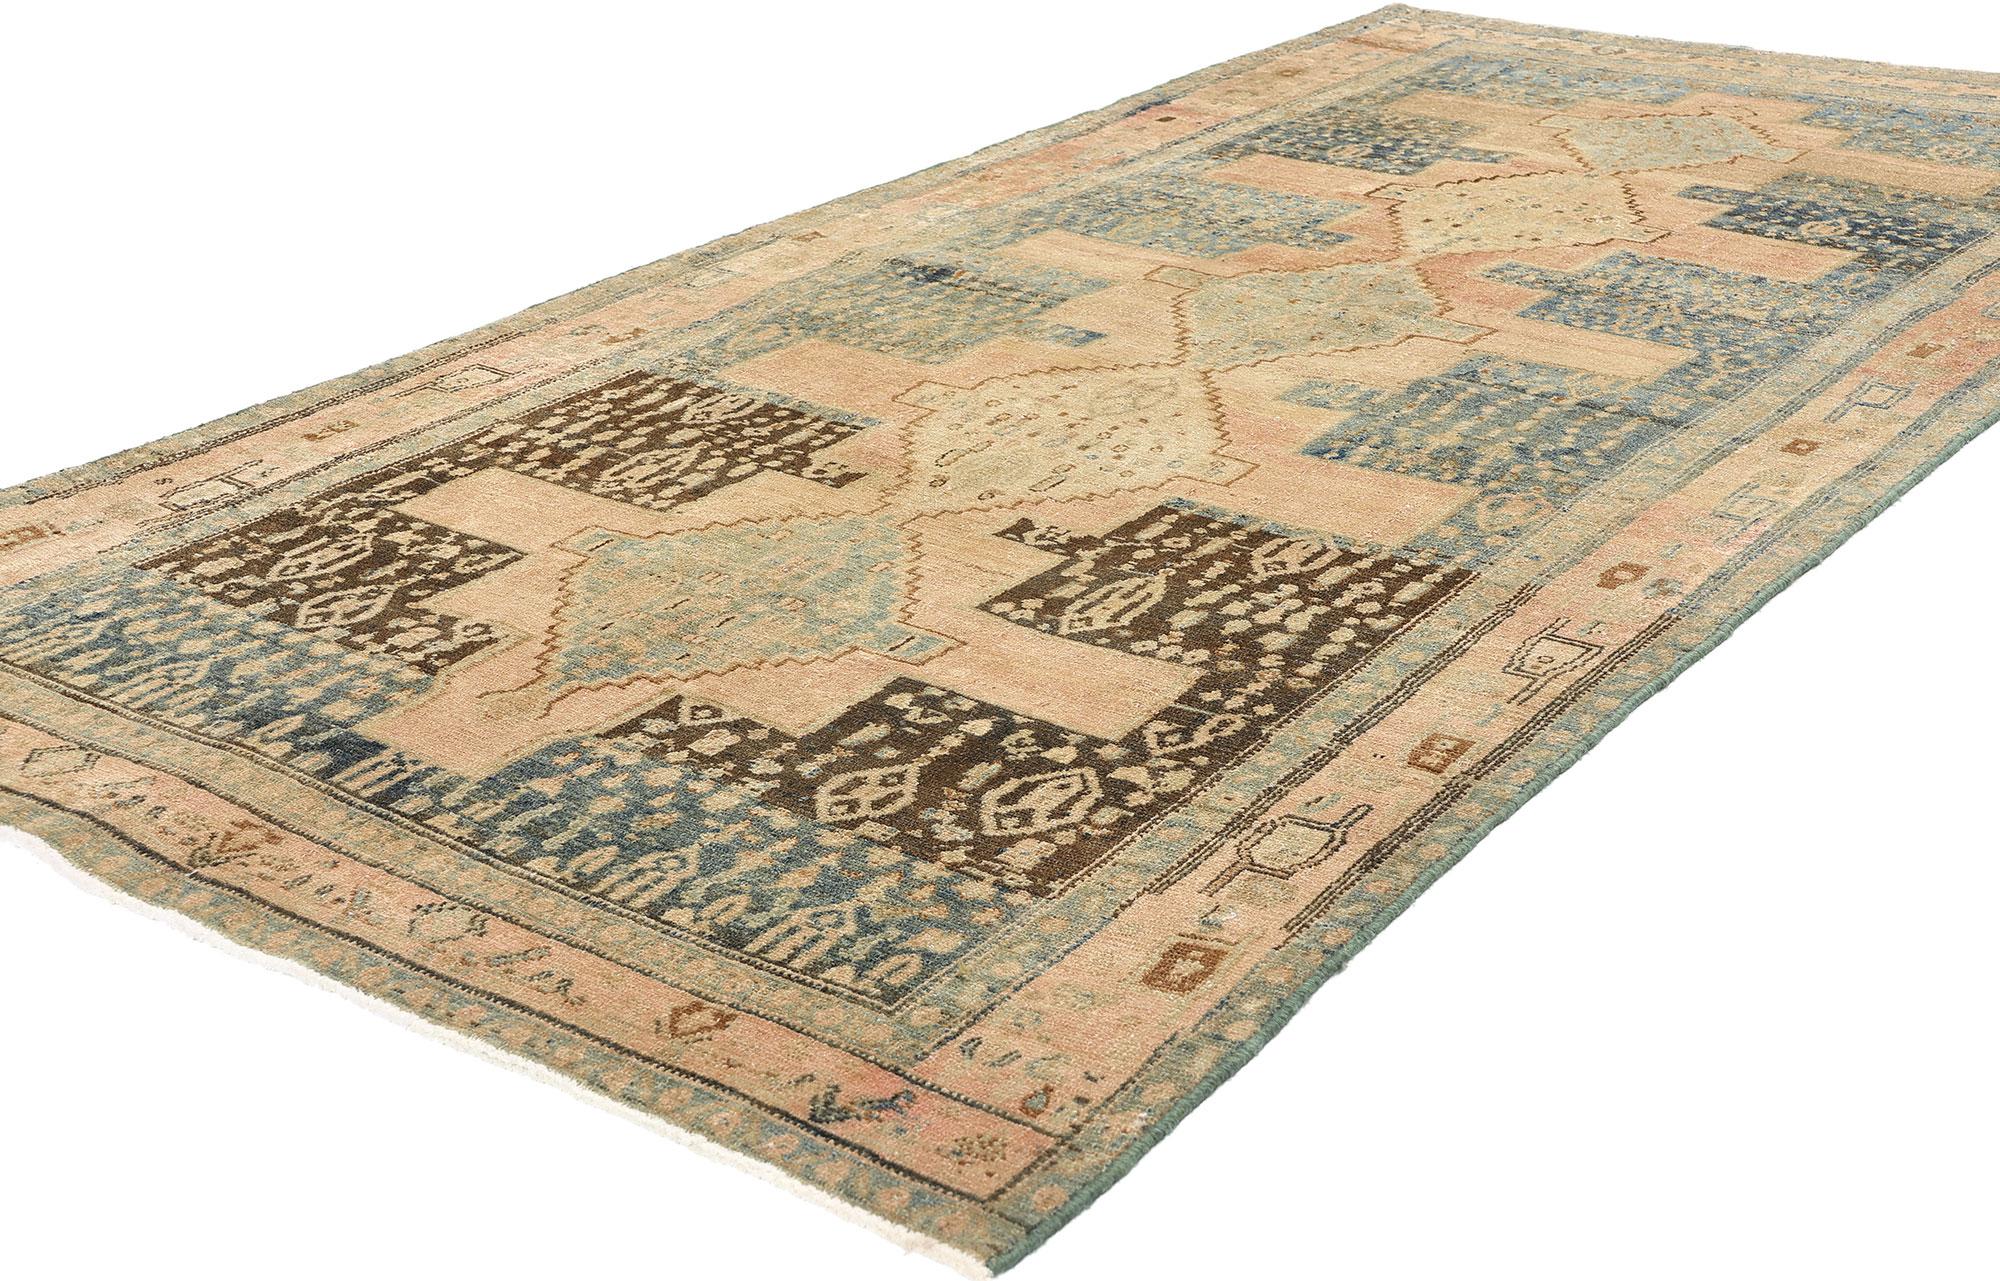 61265 Antique Persian Malayer Rug, 03'11 x 07'10. Antique-washed Persian Malayer rugs are from the Malayer region in western Iran that have undergone a special washing process to soften the colors and blur the design elements slightly, mimicking the